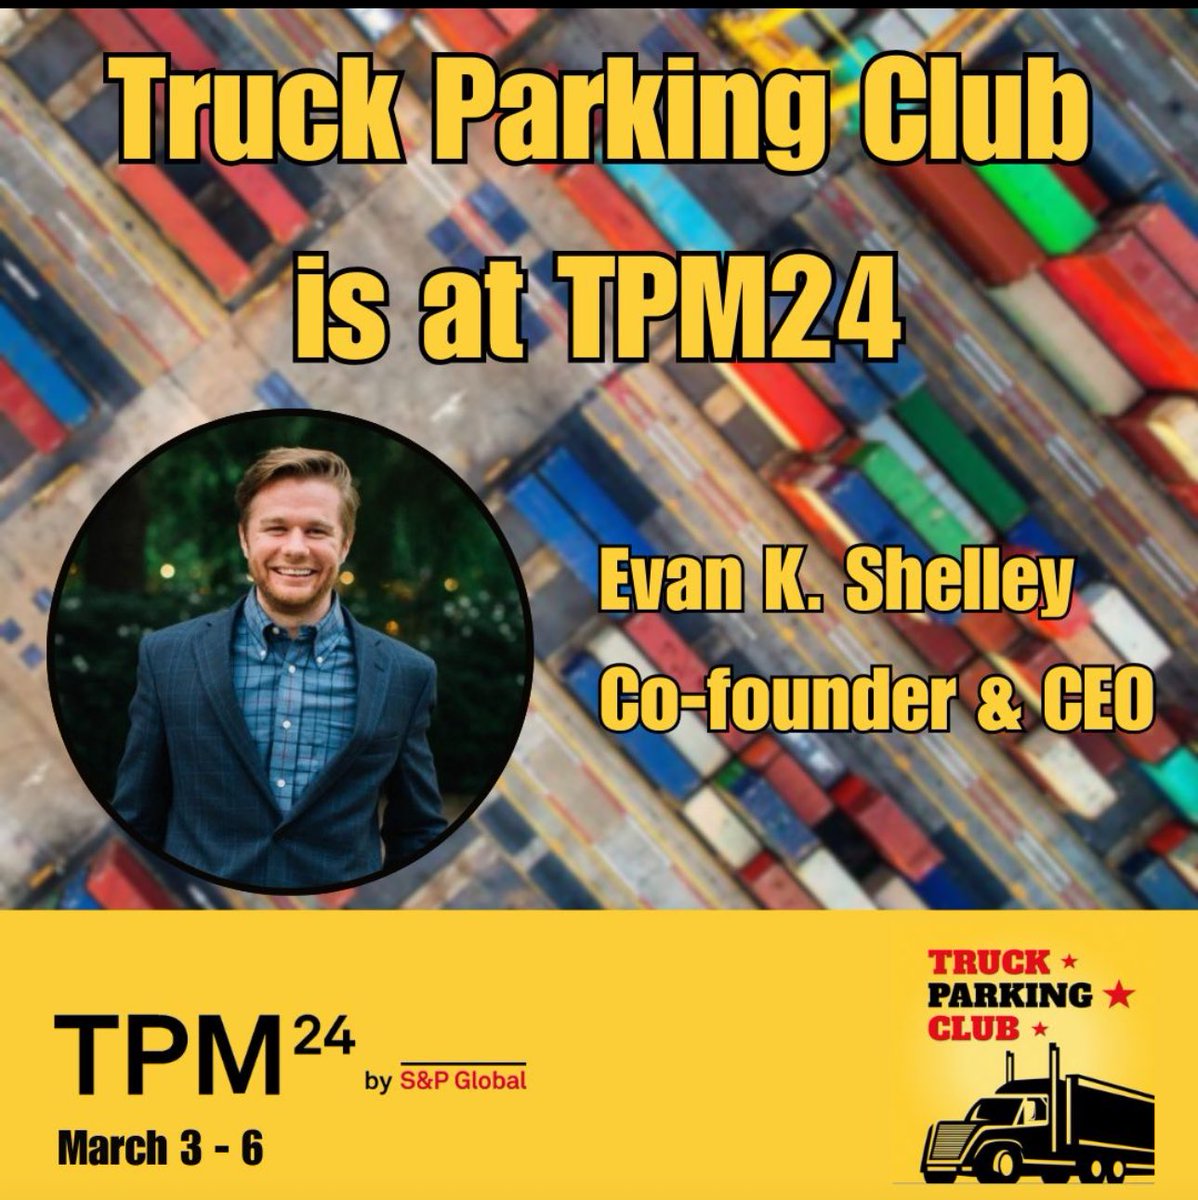 .@Truckparkingguy is at TPM24 for the next couple days.

If you're here and would like to meet, shoot us a DM!